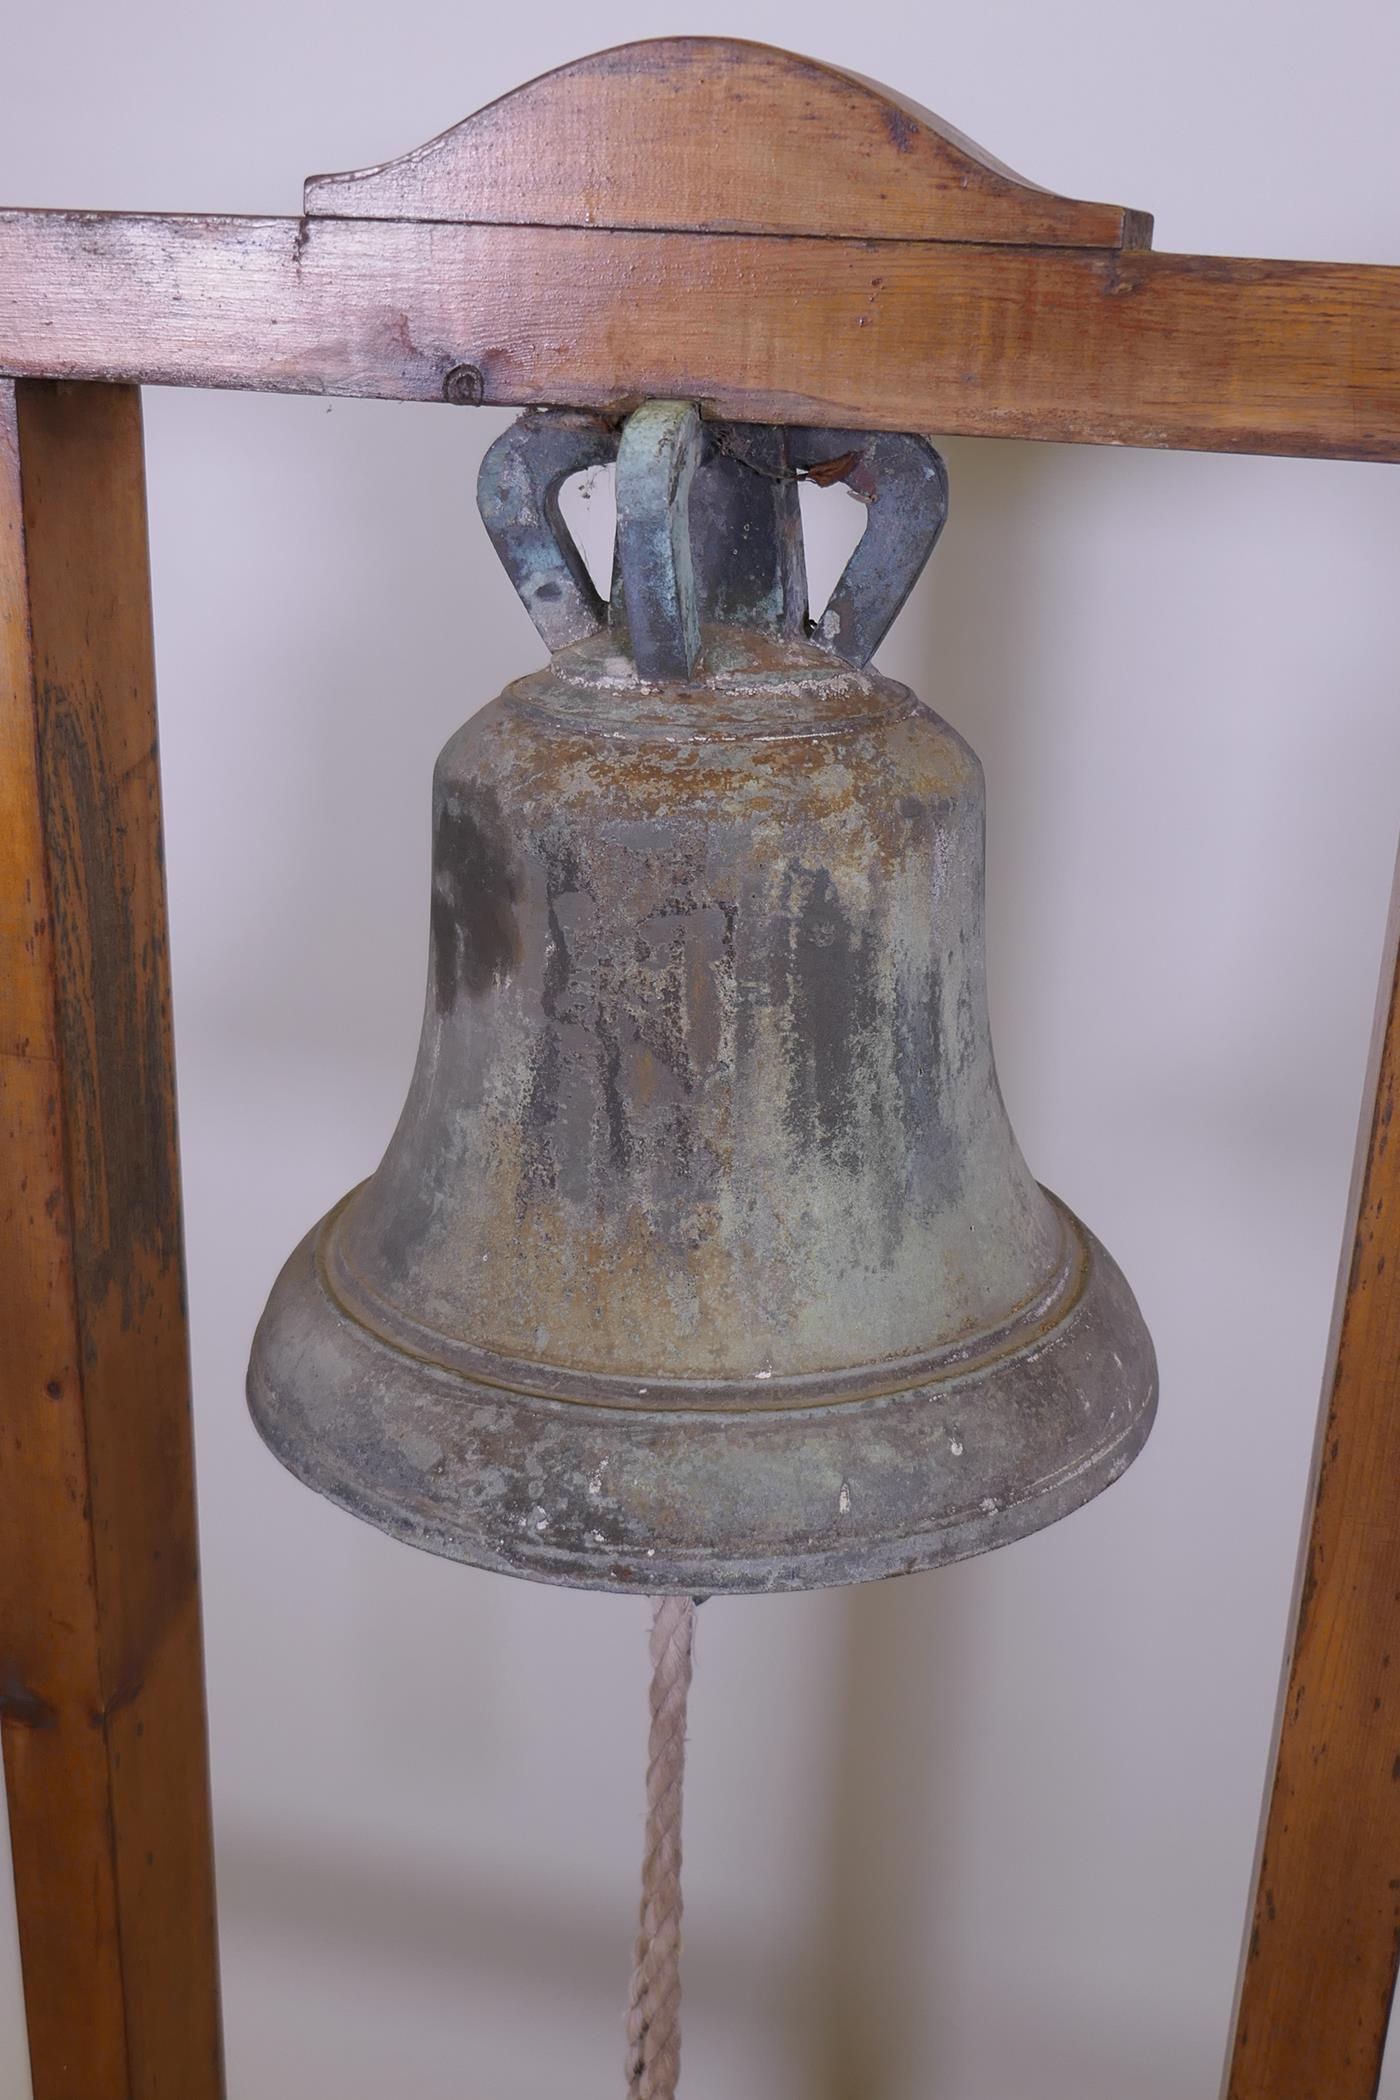 Antique bronze bell, mounted in a pine frame, 45" x 26" x 25" - Image 2 of 4